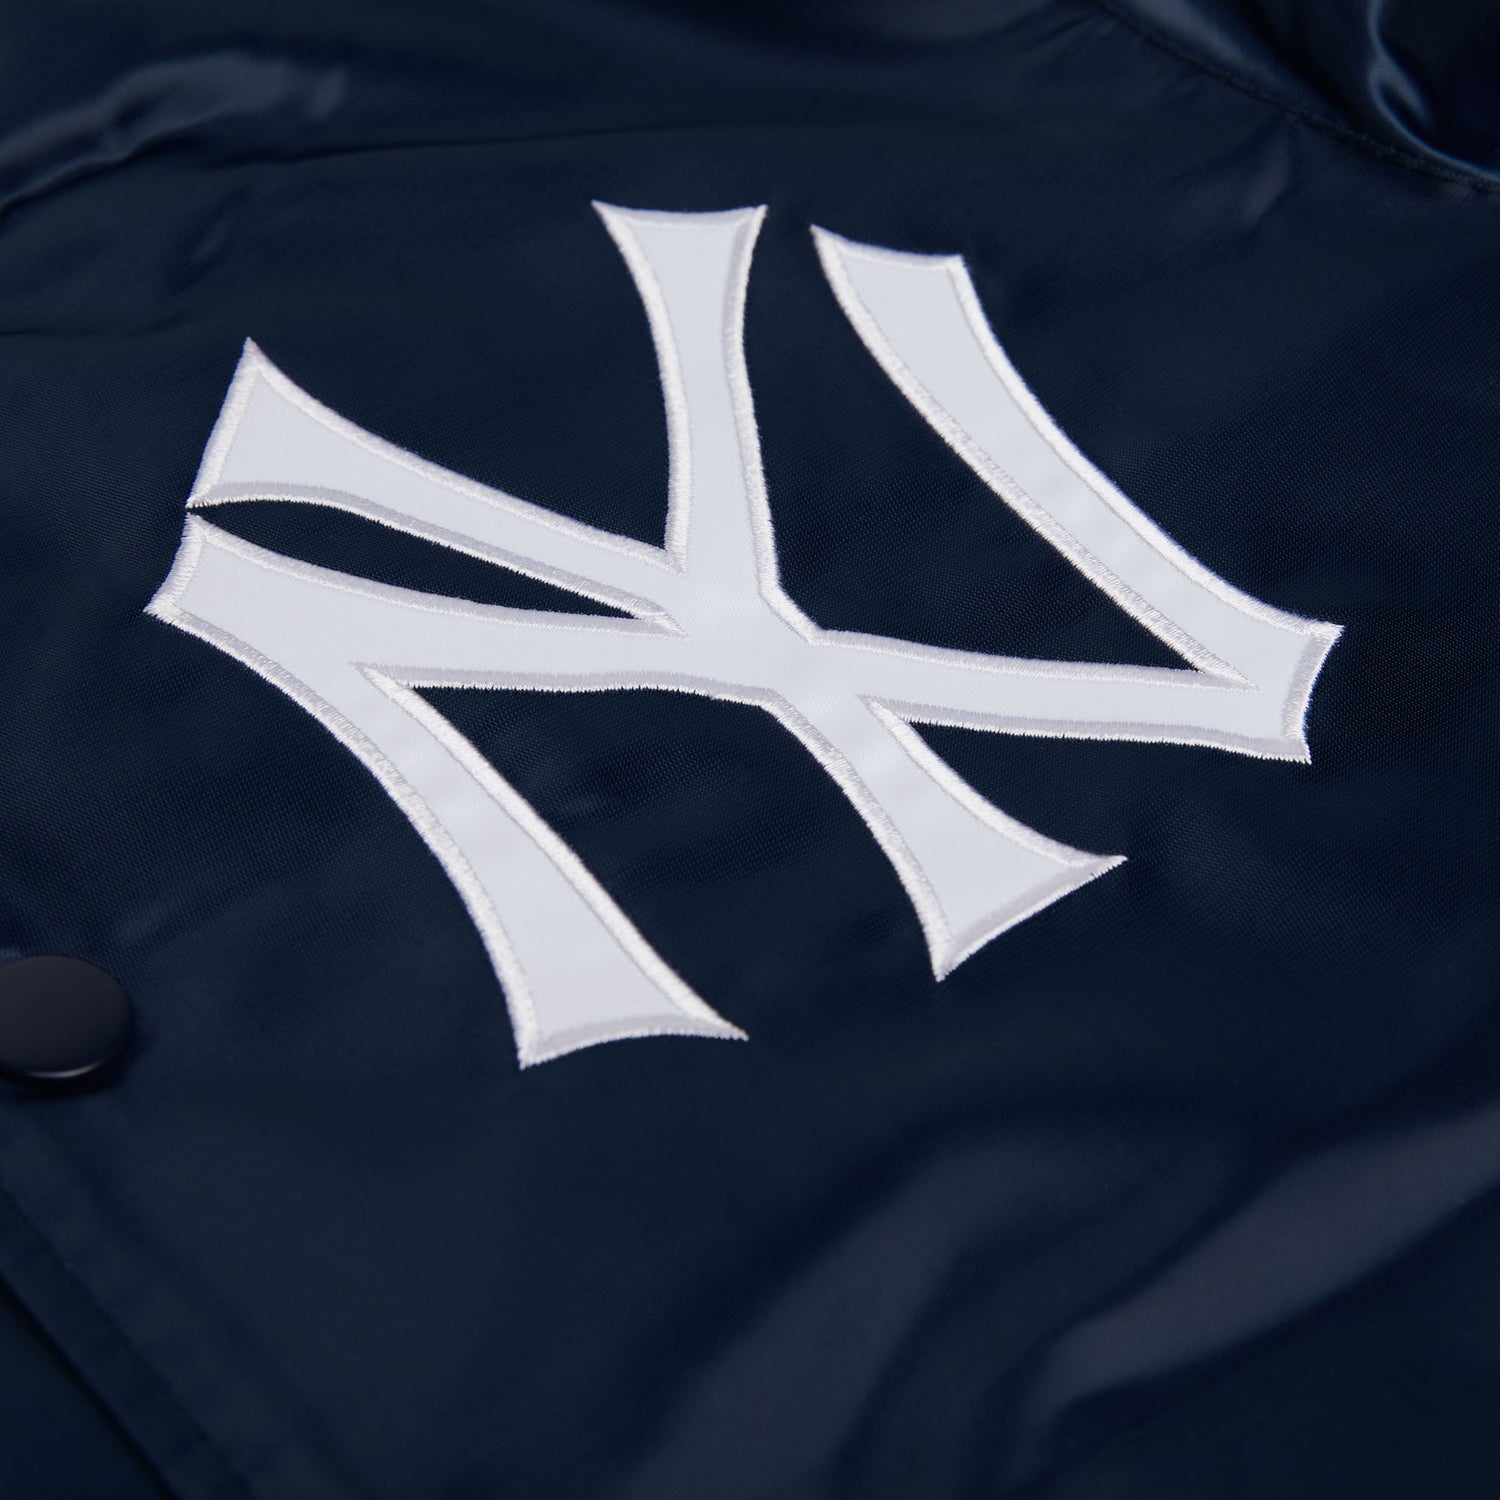 NEW YORK YANKEES  Gameday outfit, Outfits, Fashion